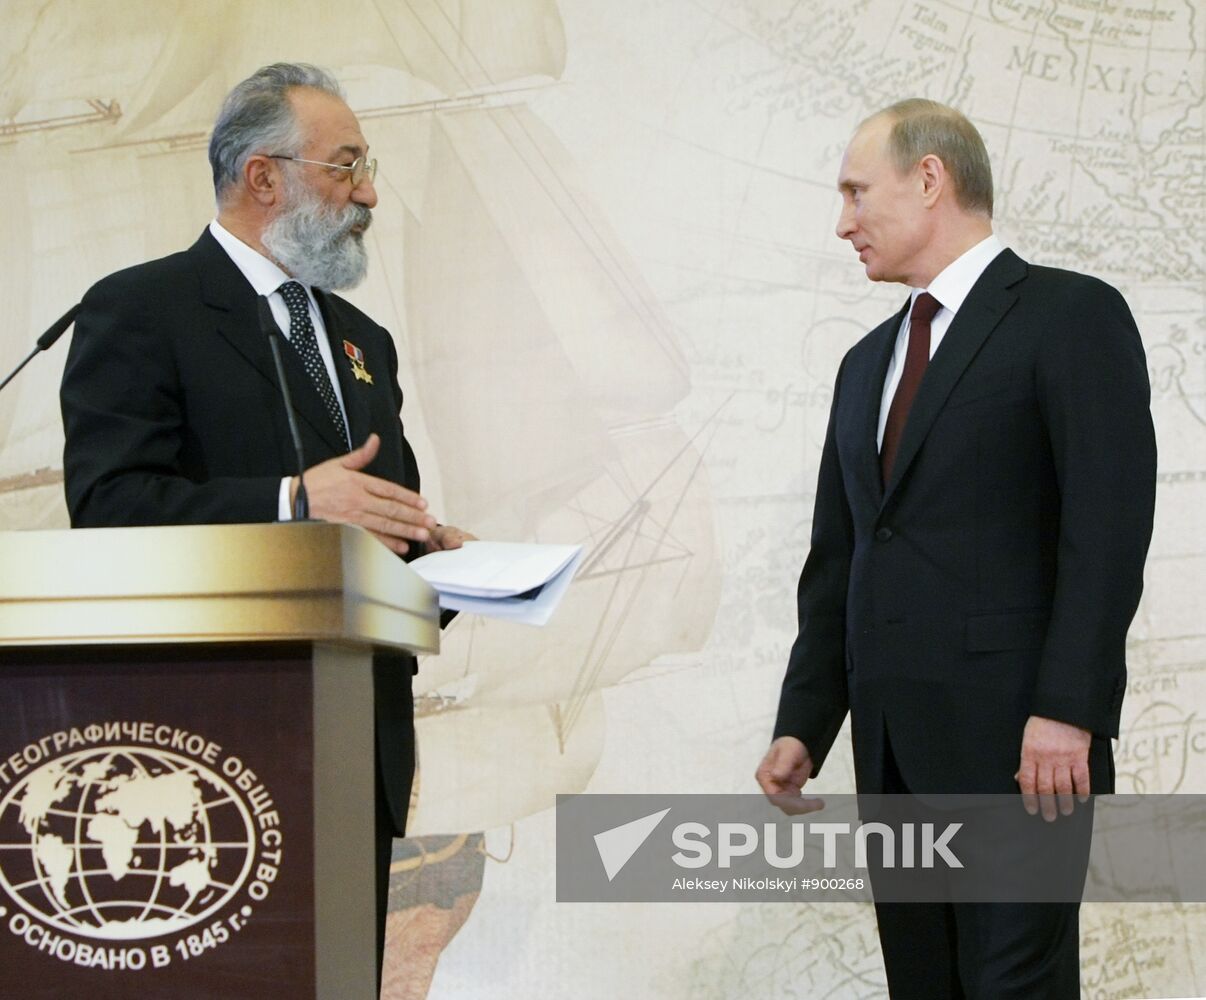 Vladimir Putin attends RGS Board of Trustees, Moscow